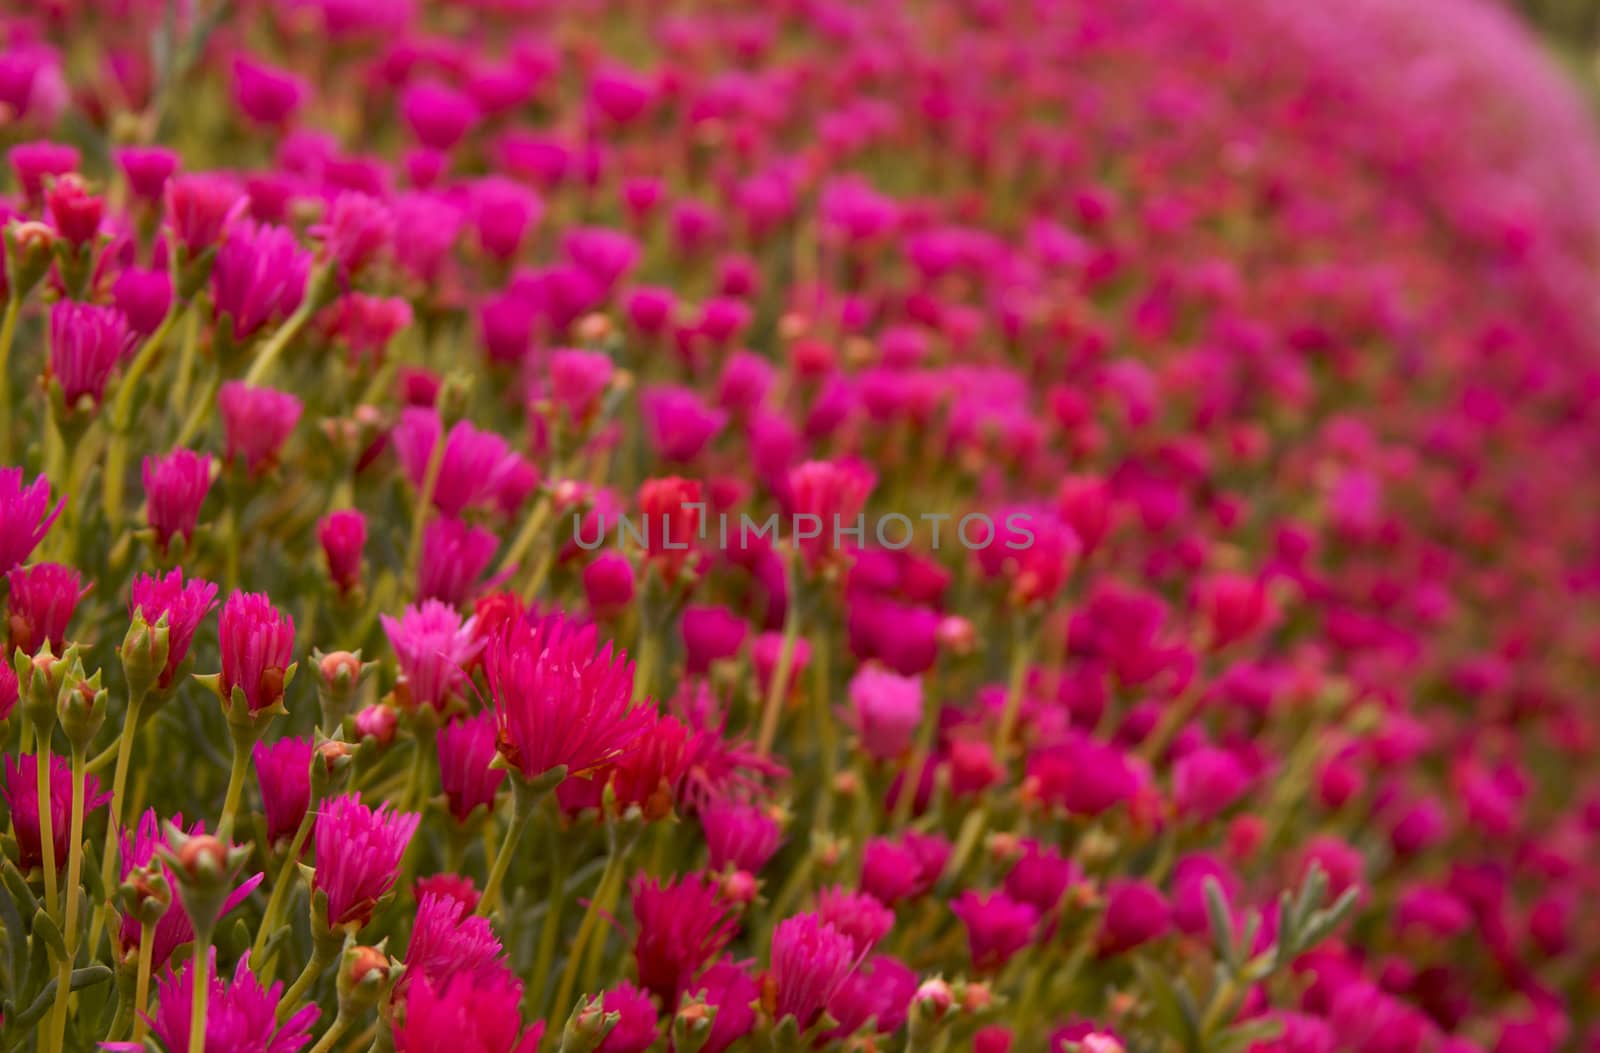 Bed of red and pink flowers by bobkeenan